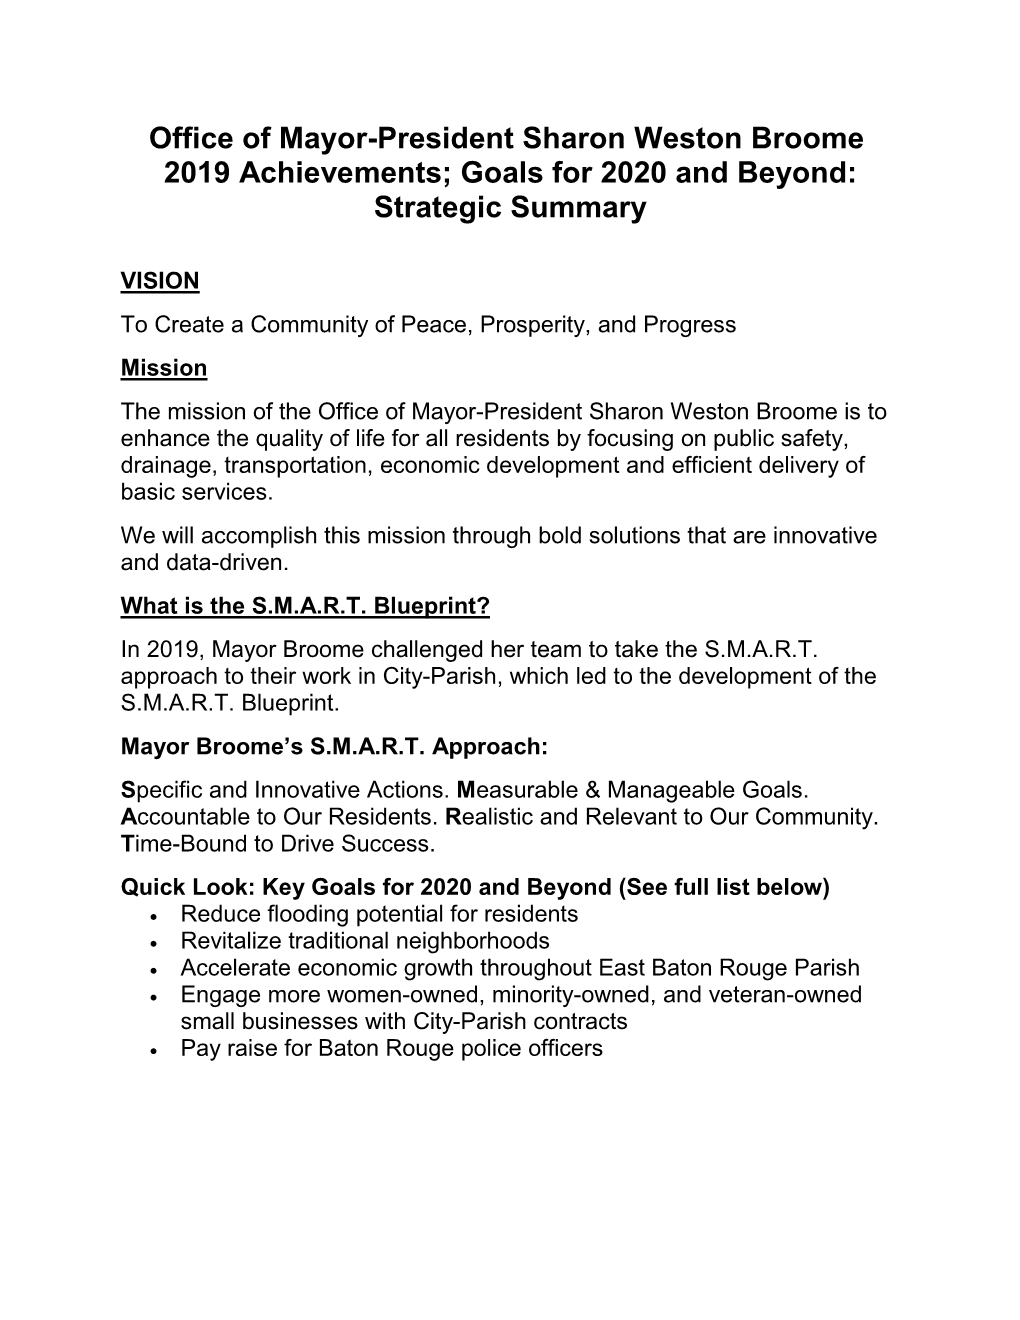 Office of Mayor-President Sharon Weston Broome 2019 Achievements; Goals for 2020 and Beyond: Strategic Summary